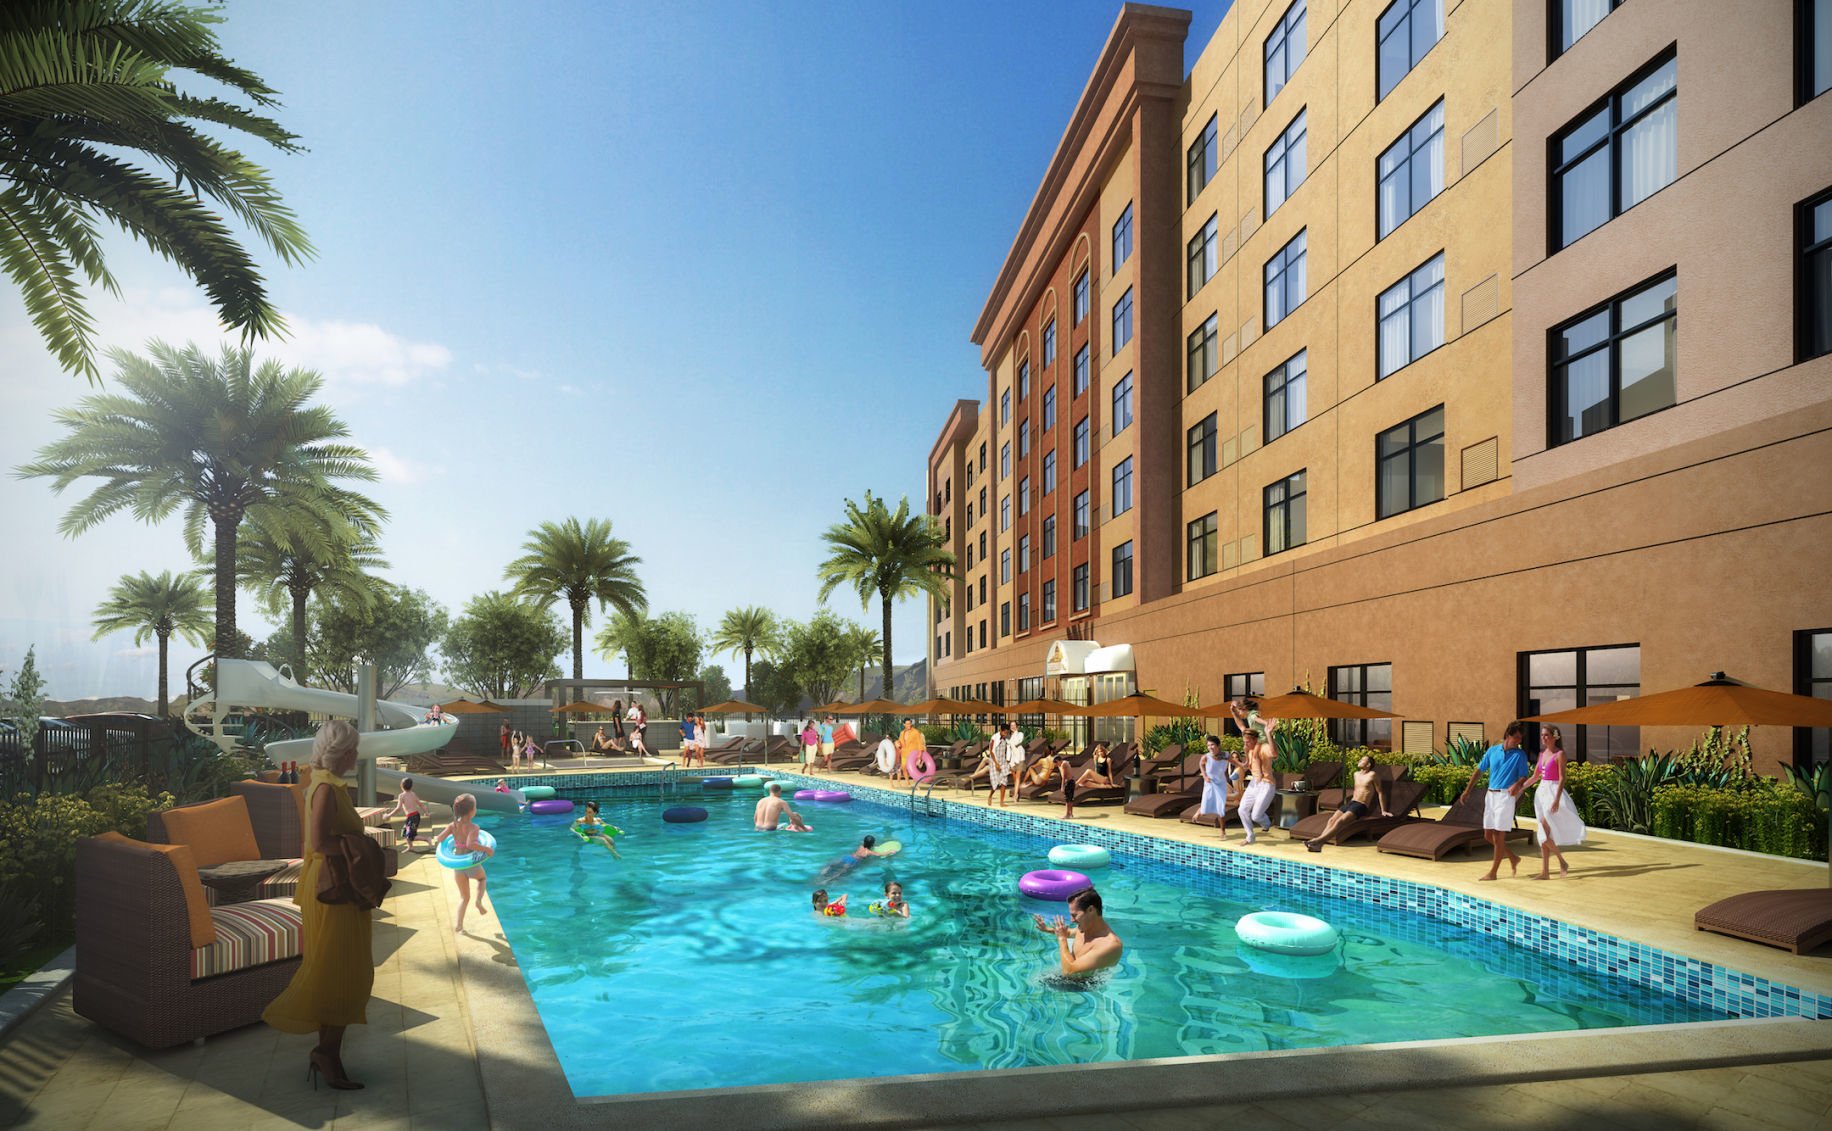 Casino Del Sols newest hotel will feature a water slide, pool bar and an arcade